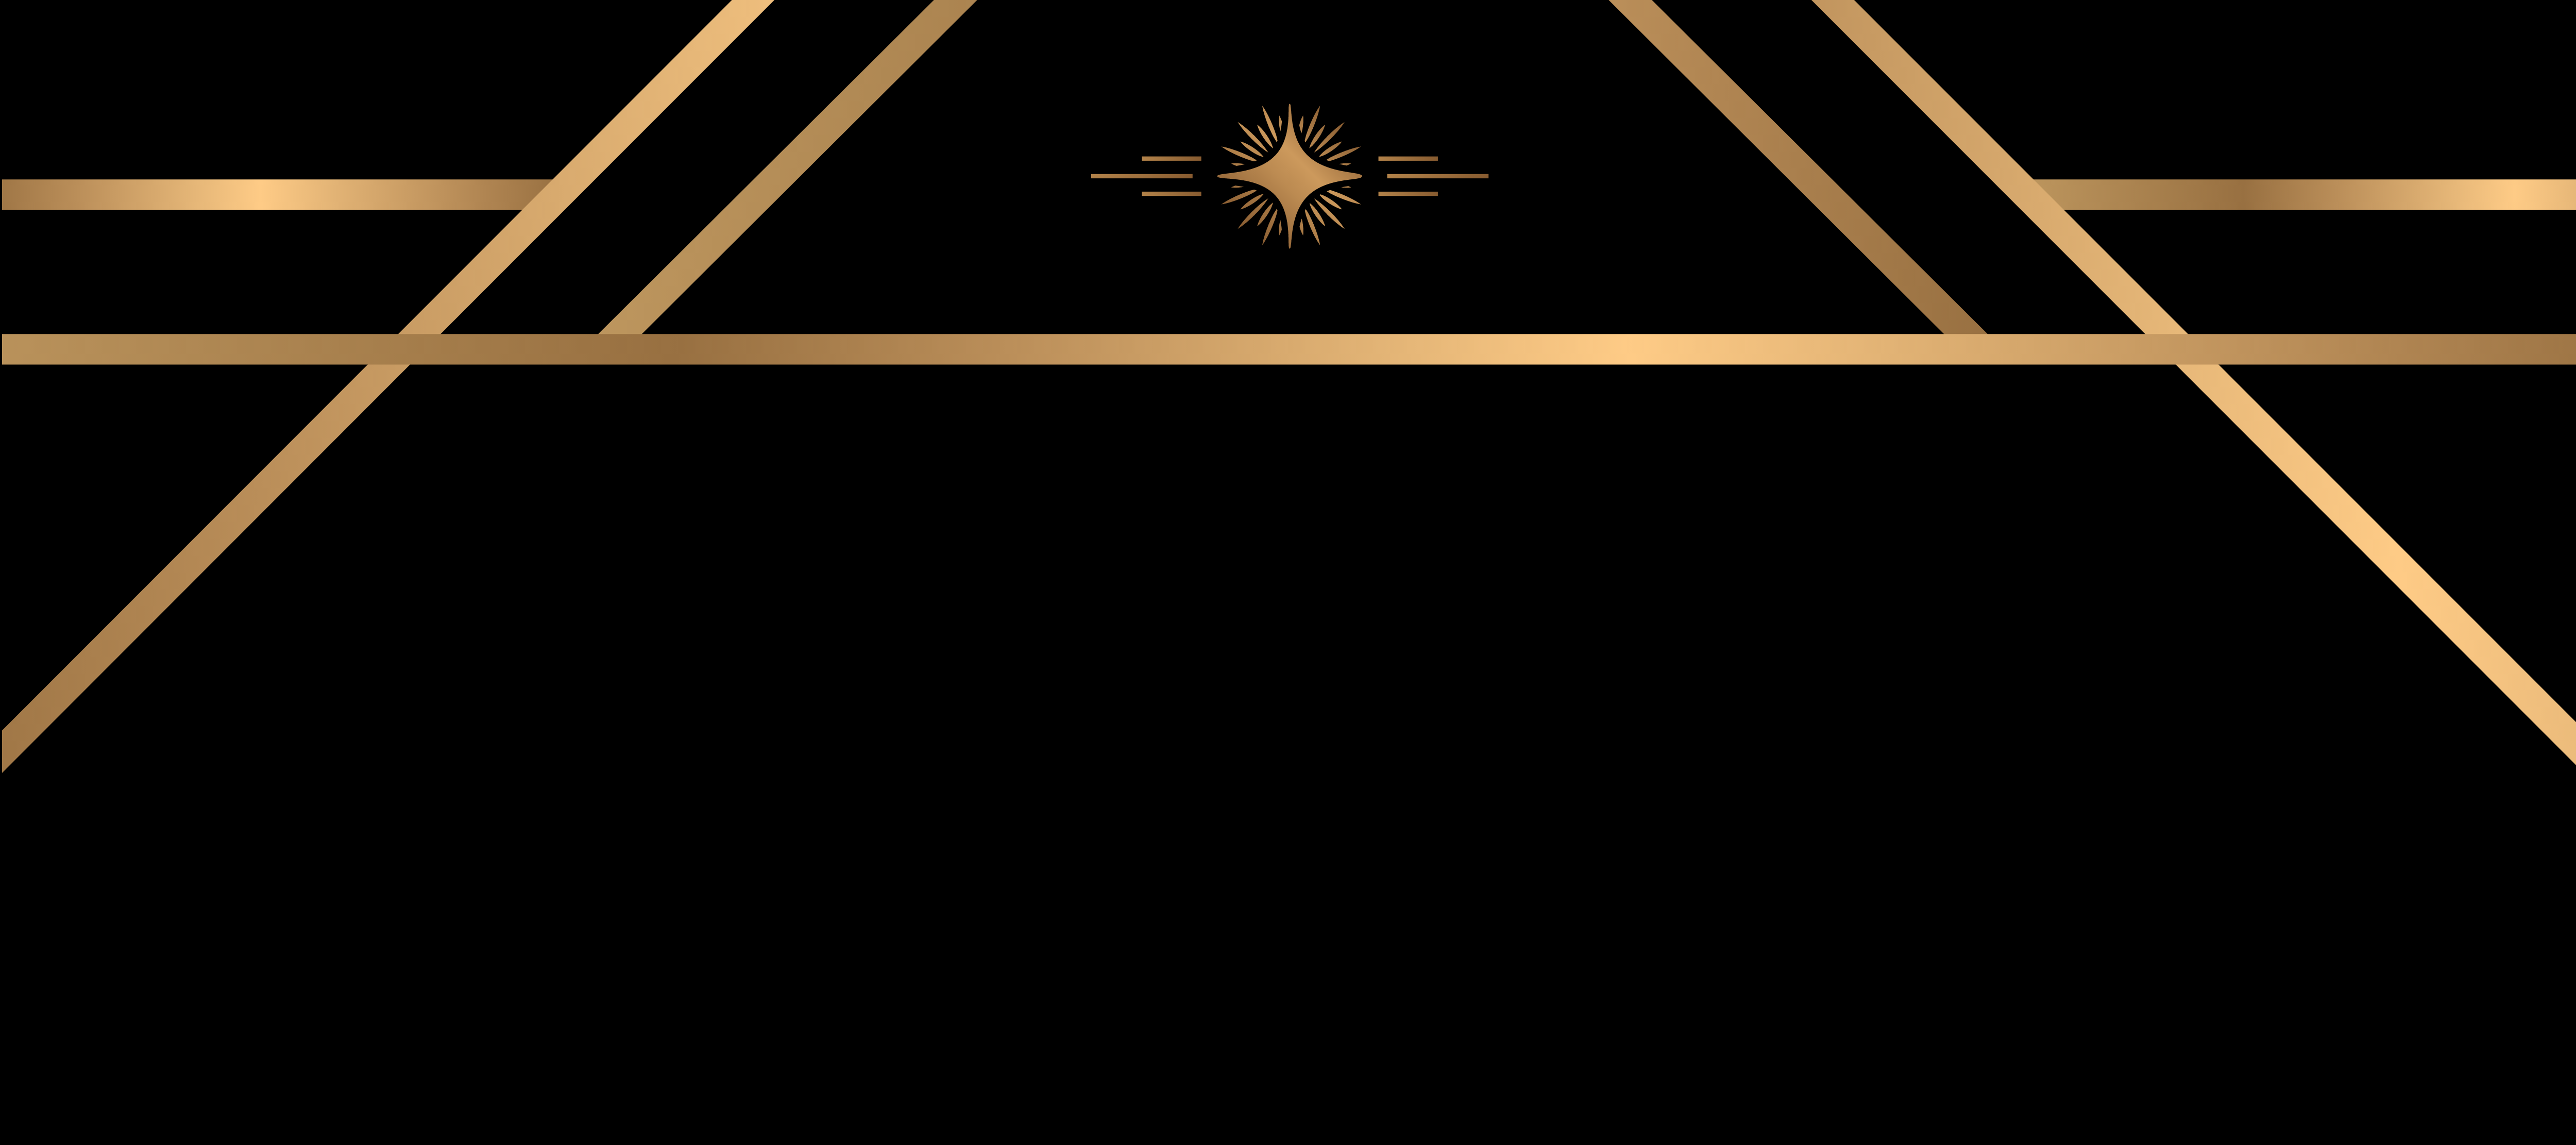 Gold Star with Angle Border